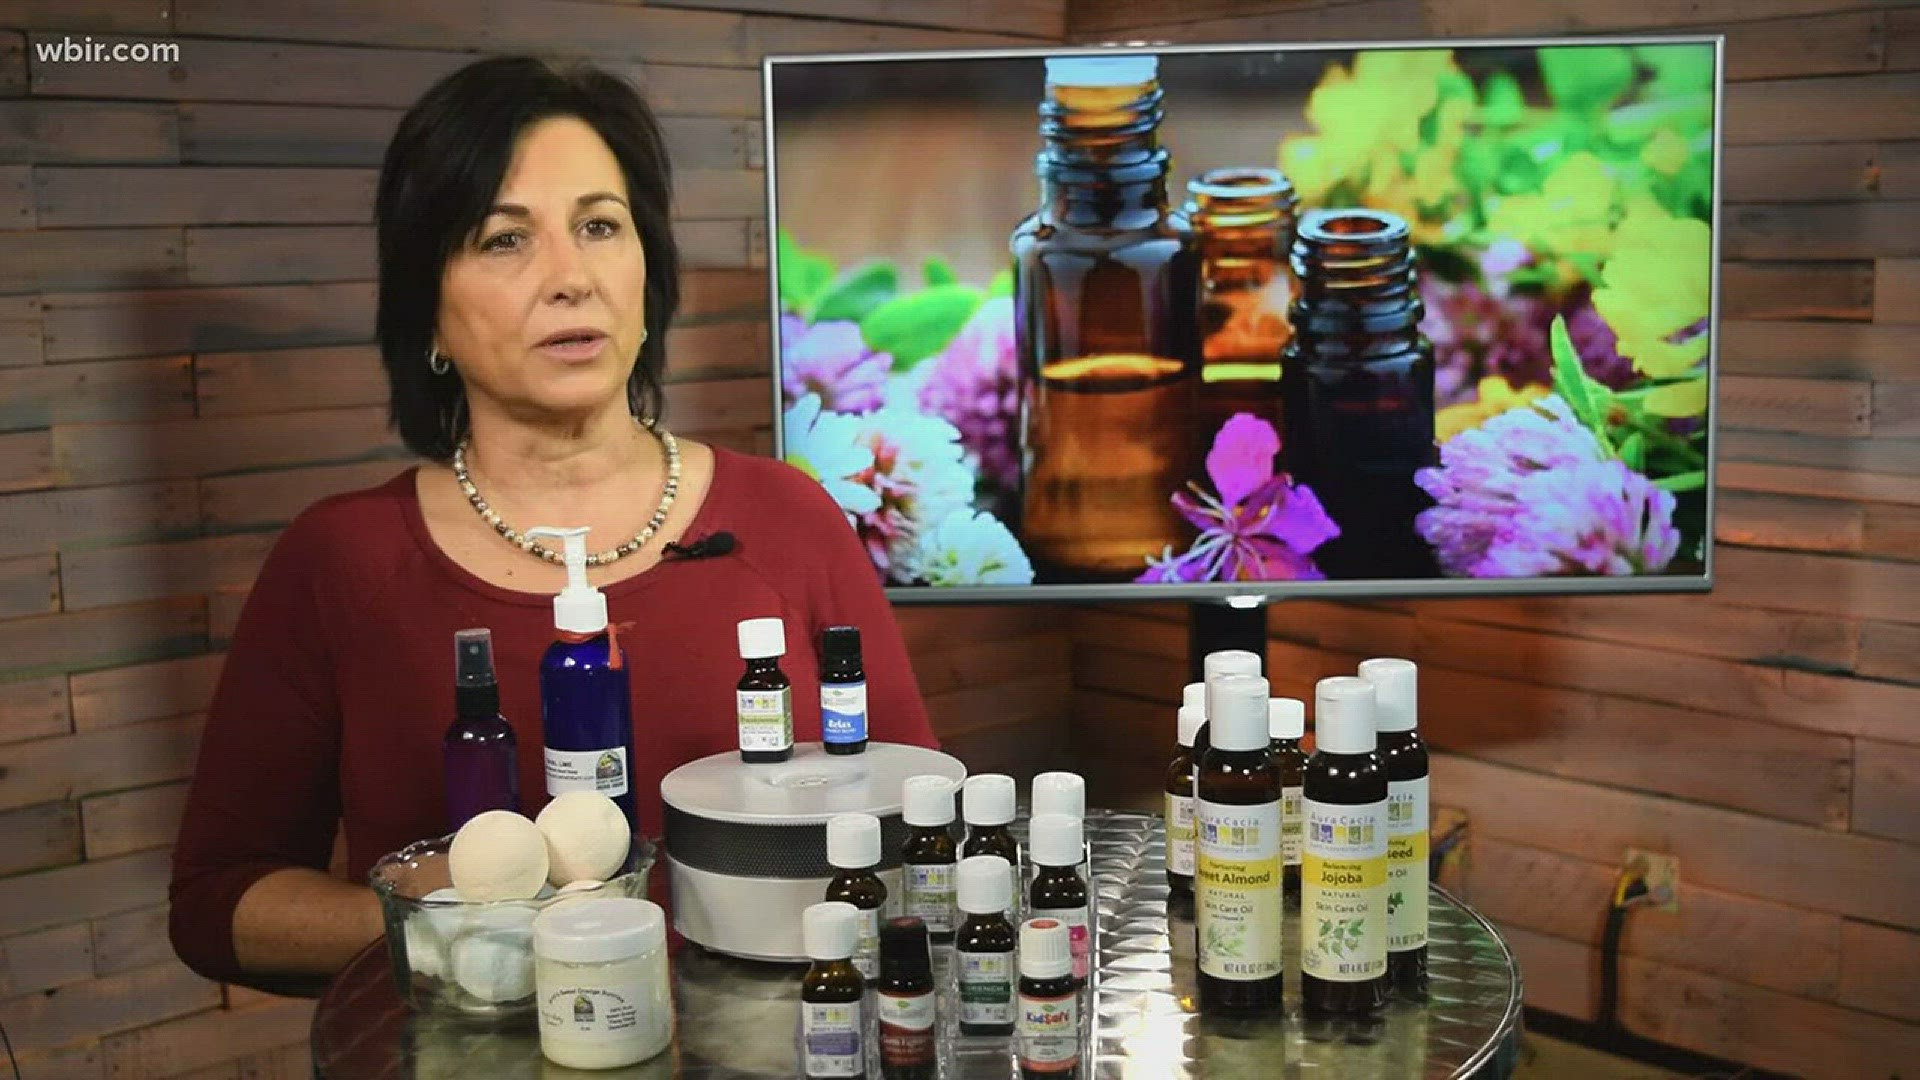 Essential Oils can potentially be harmful for certain people if used incorrectly, as they are potent.